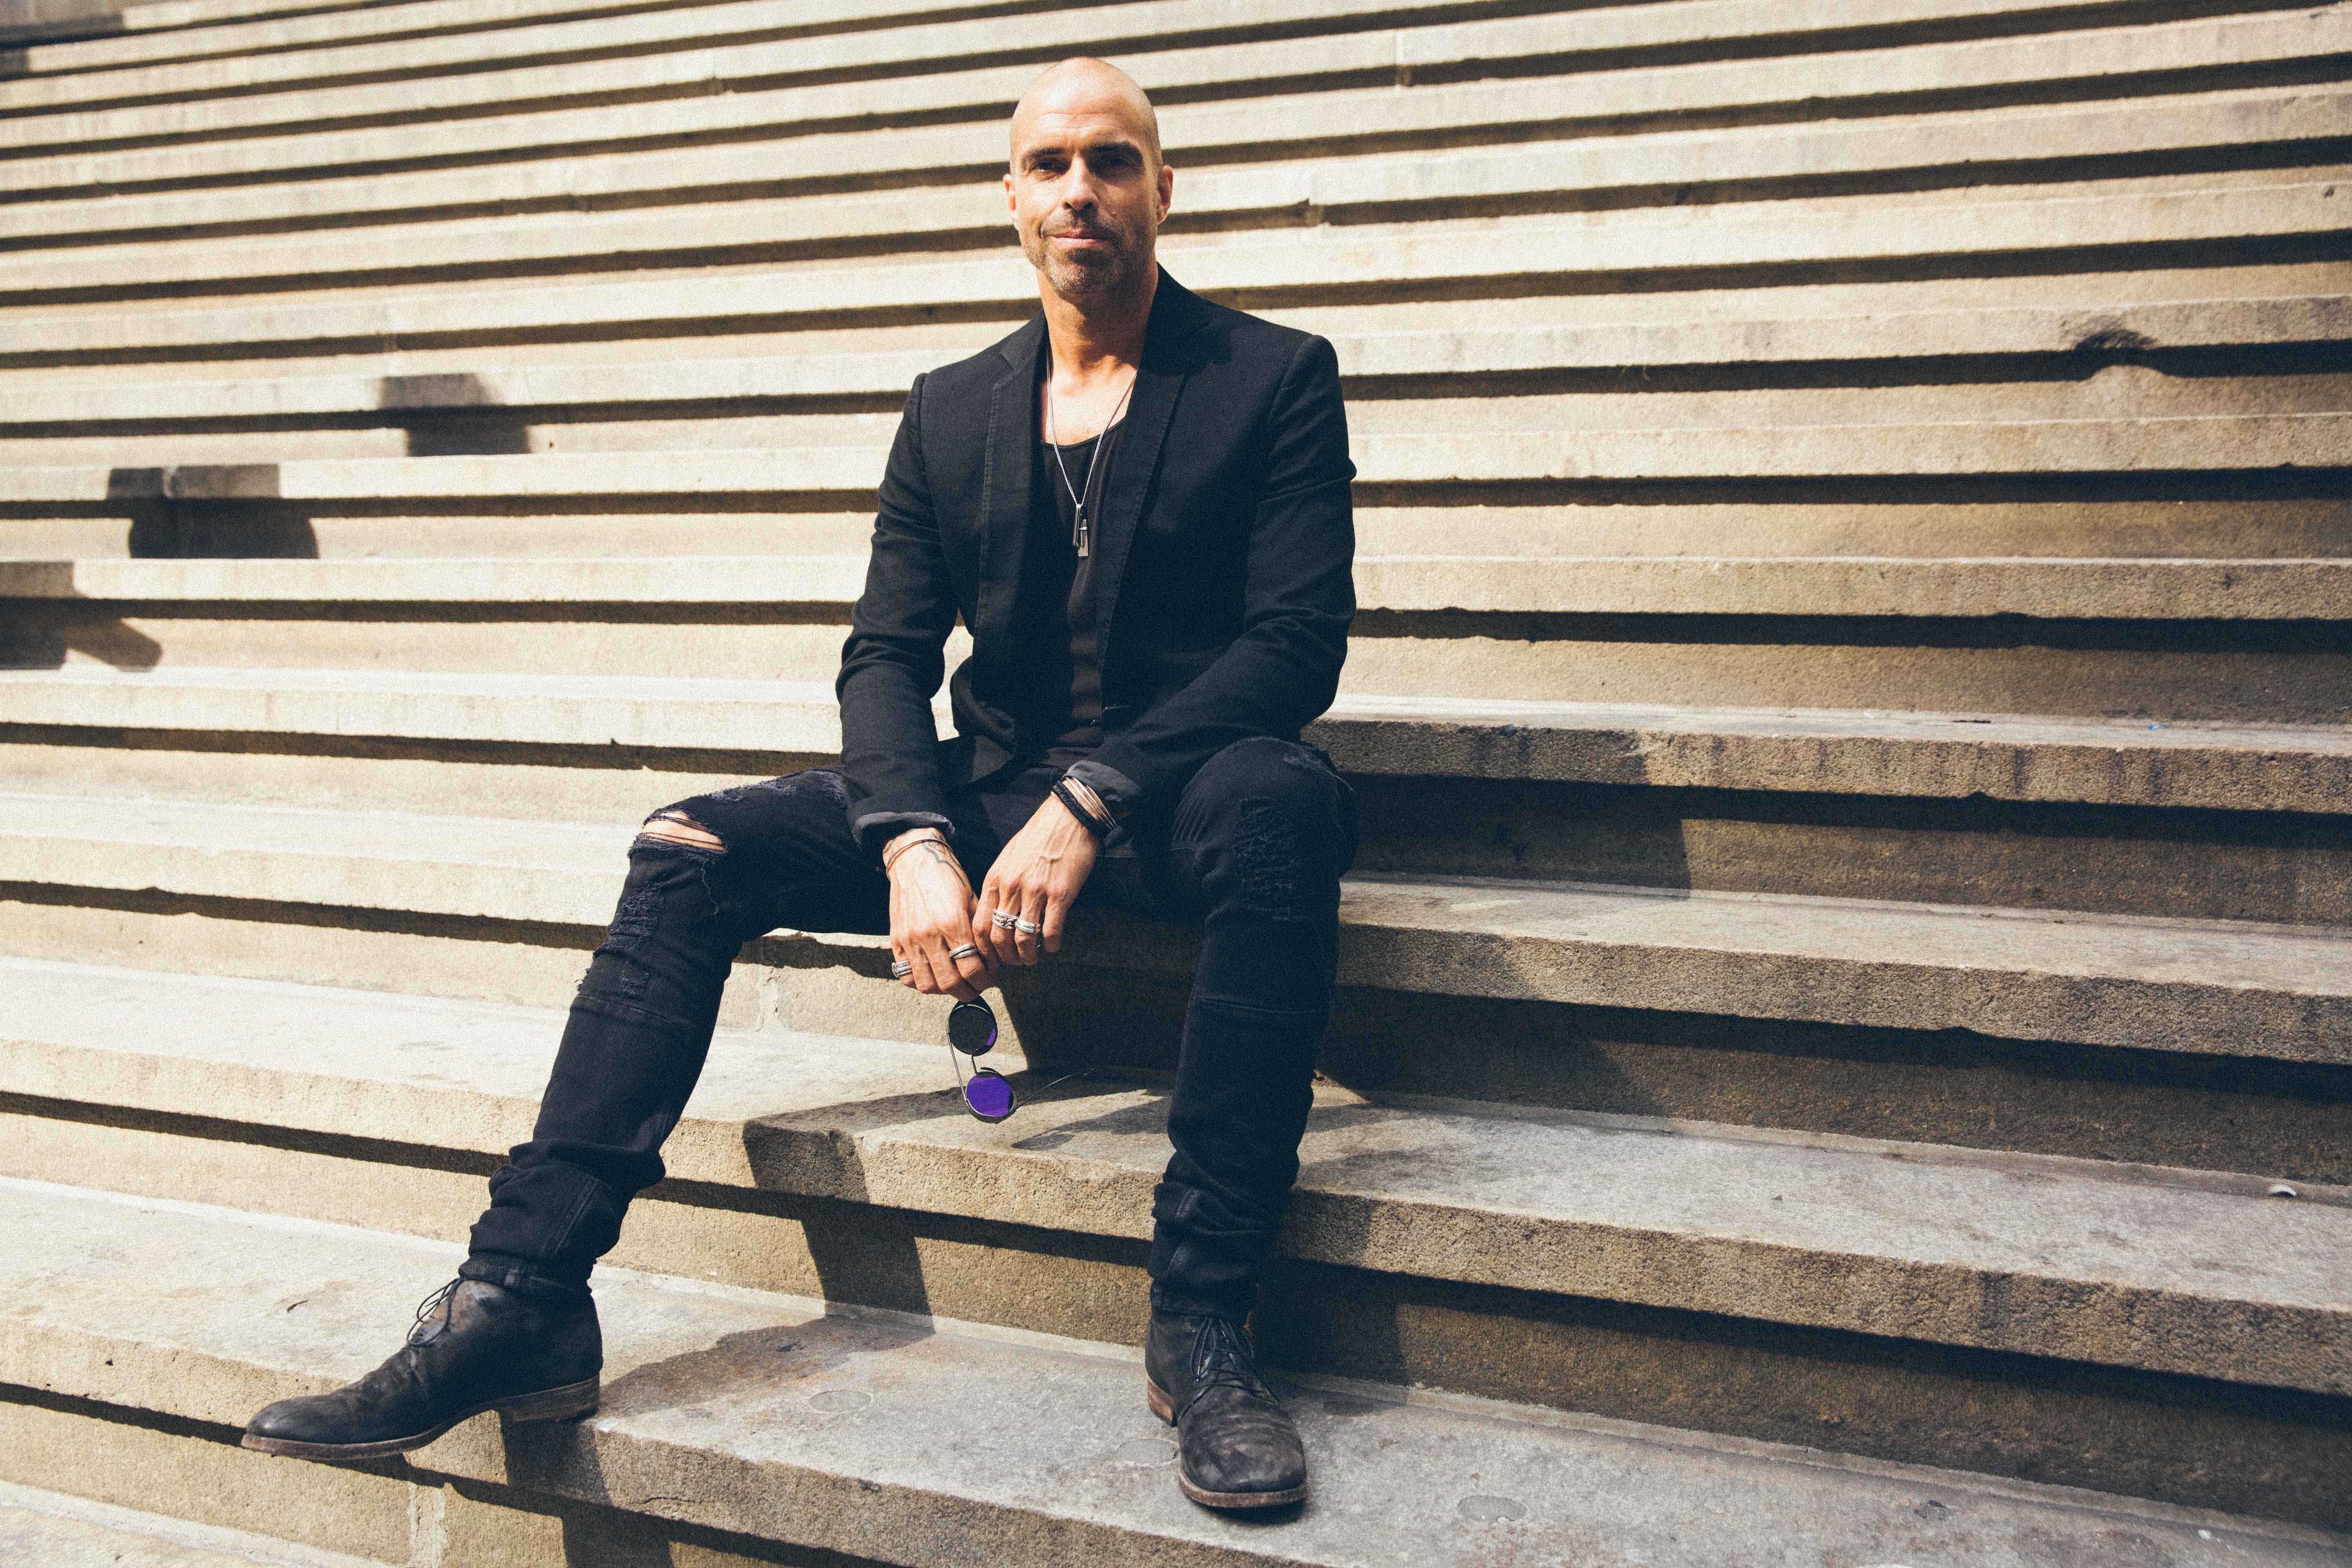 Chris Liebing’s “Polished Chrome” Gets Remix From Throbbing Gristle’s Chris Carter (premiere)